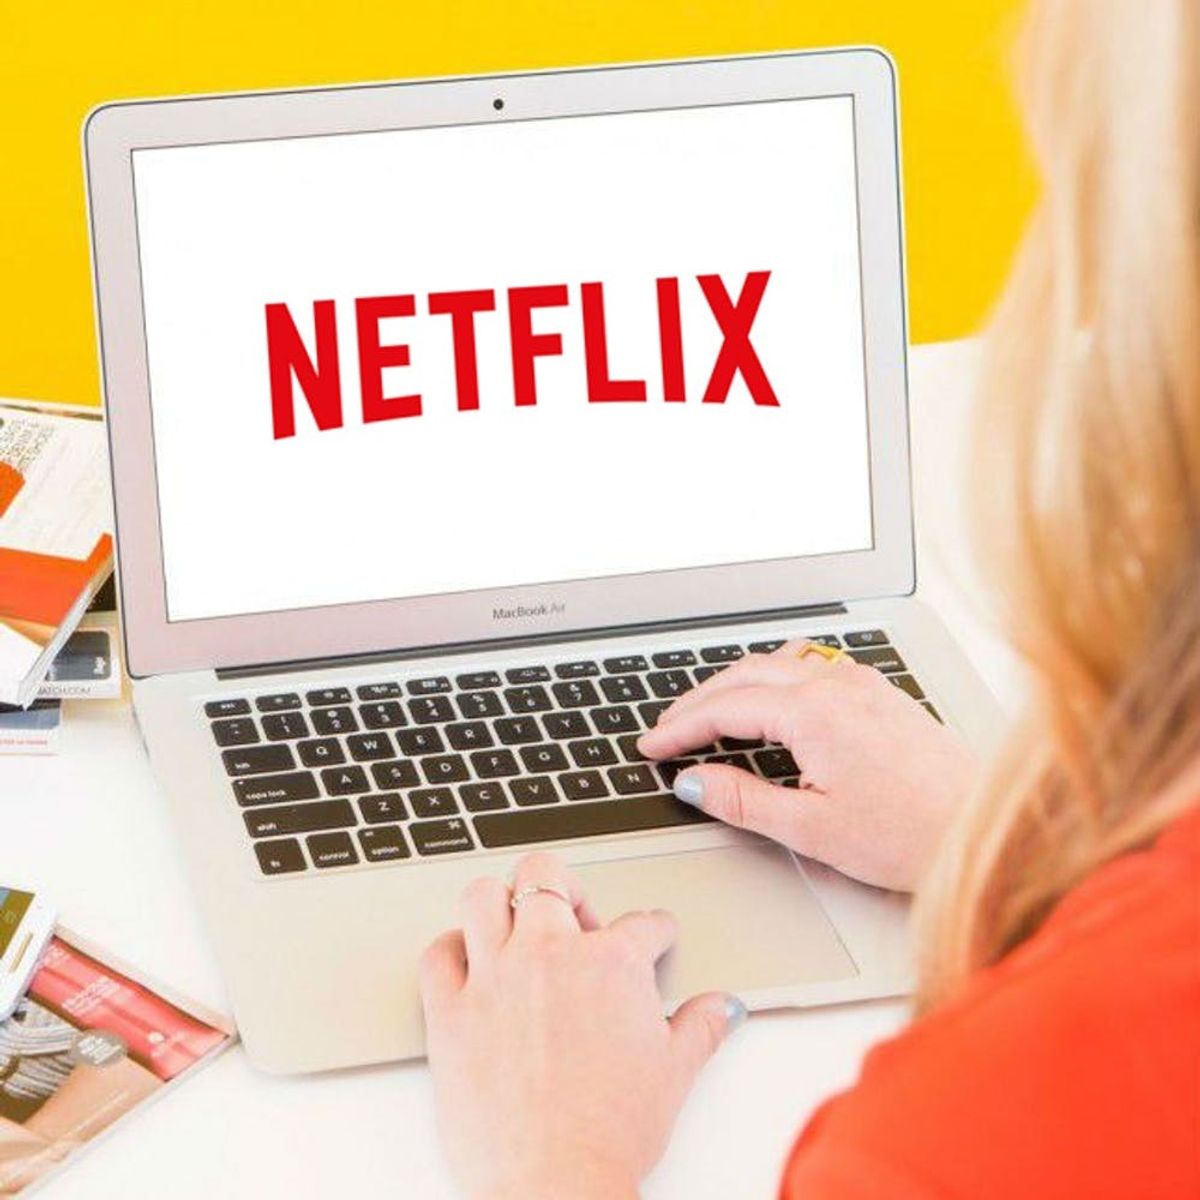 Here Is the Good News About That BAD Netflix News